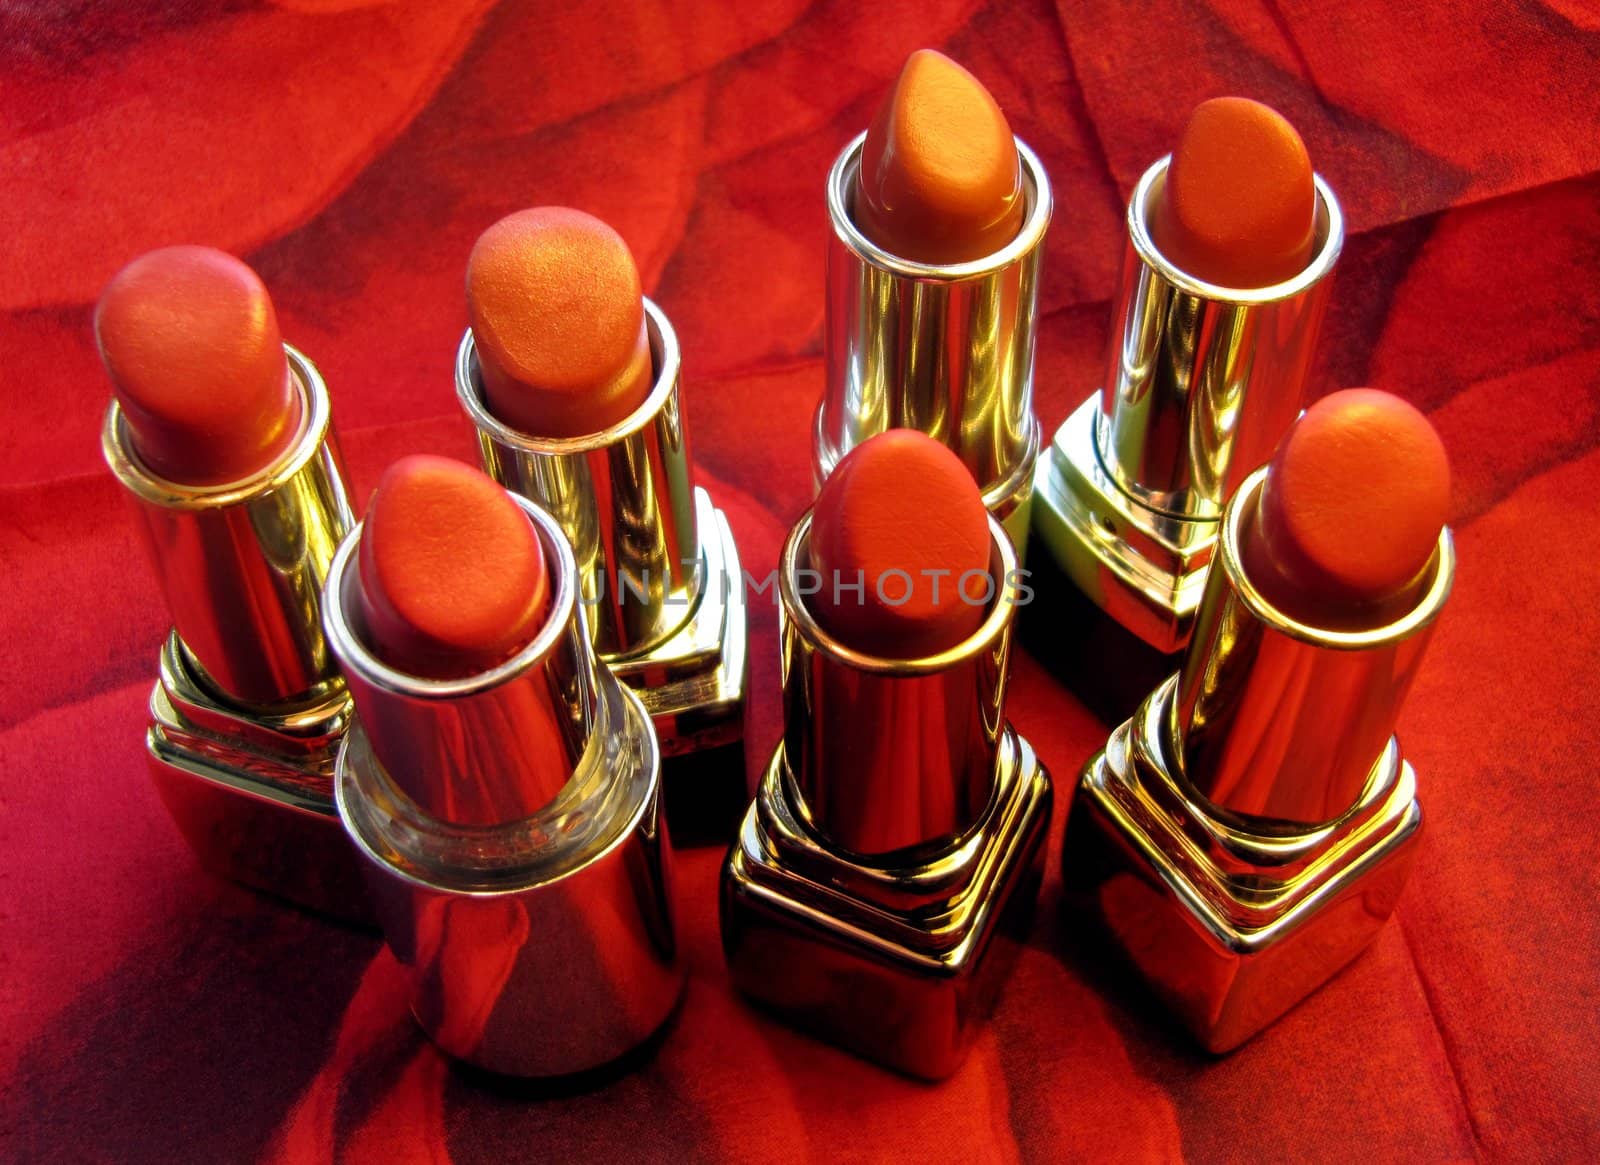 A group of seven lipsticks over a red background.